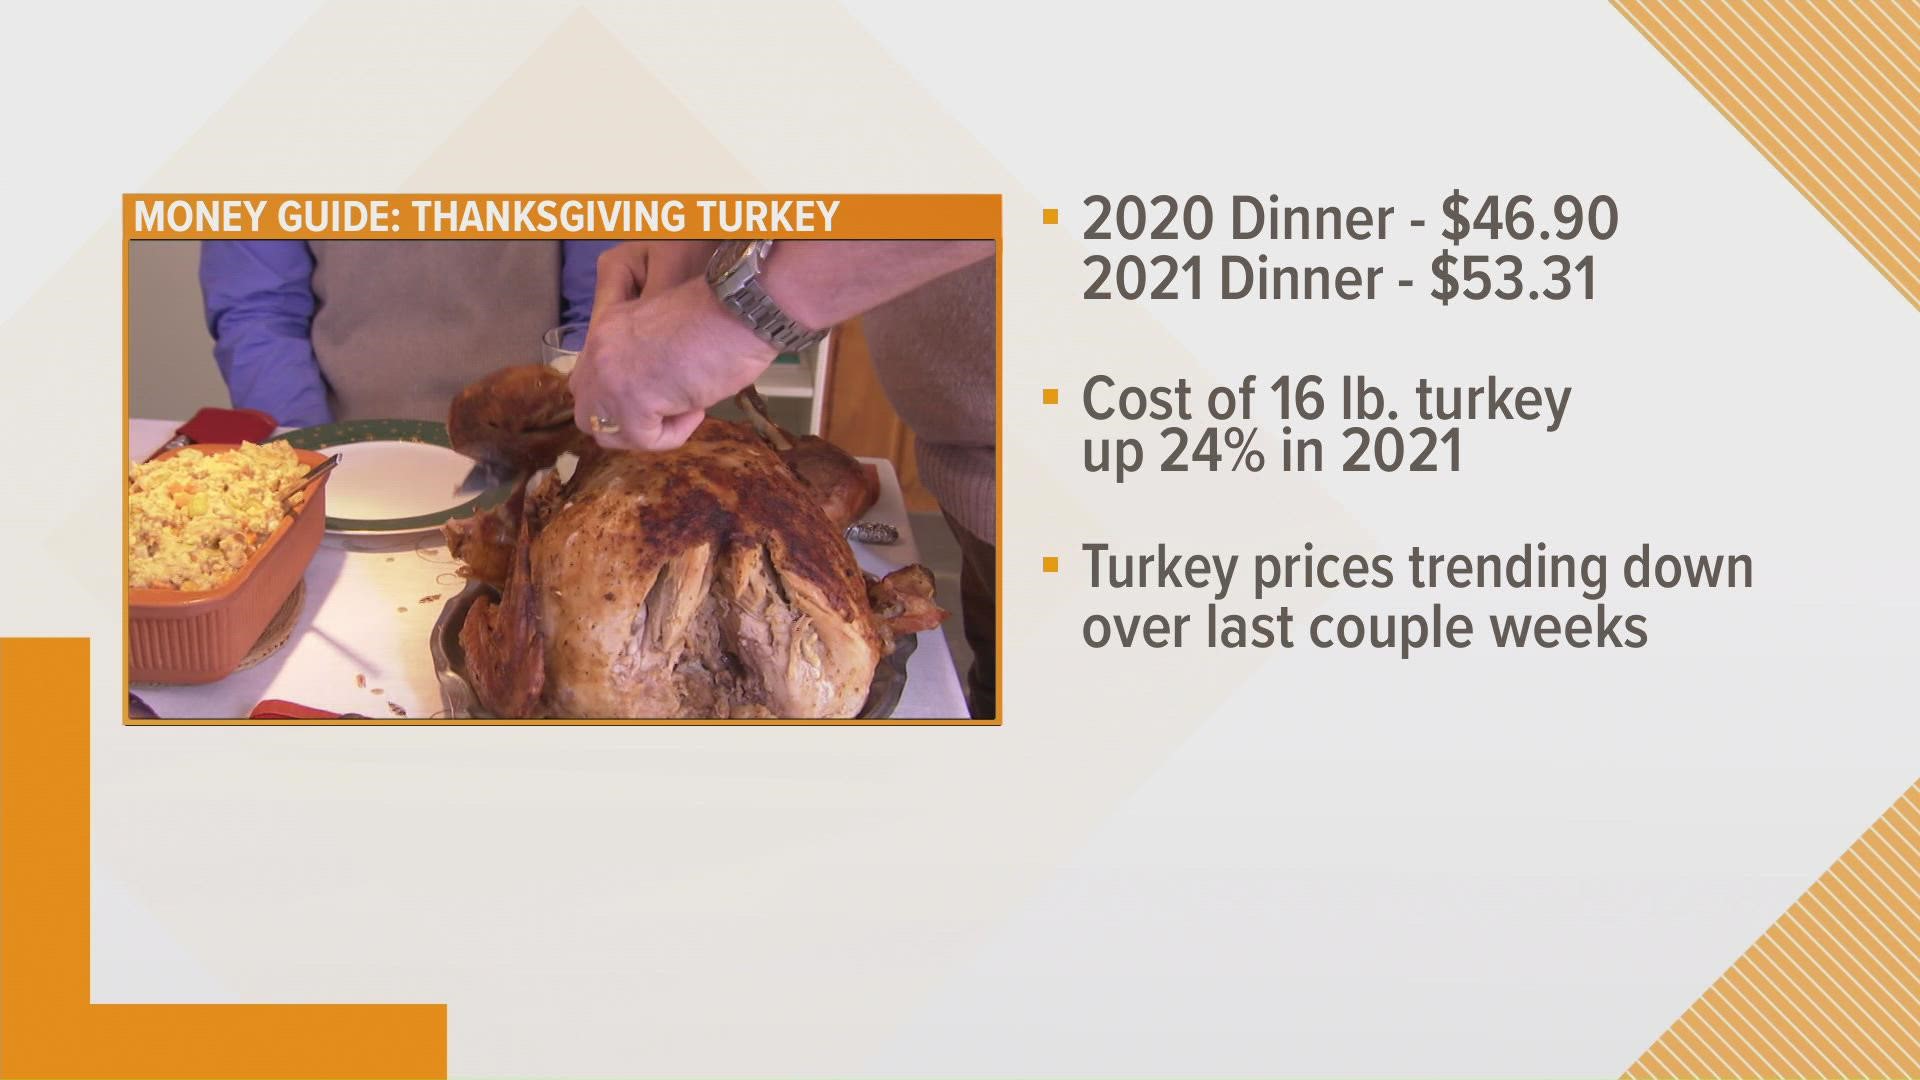 13 ON YOUR SIDE Money Guide: Thanksgiving dinner costs more this year thanks to supply and labor shortages.